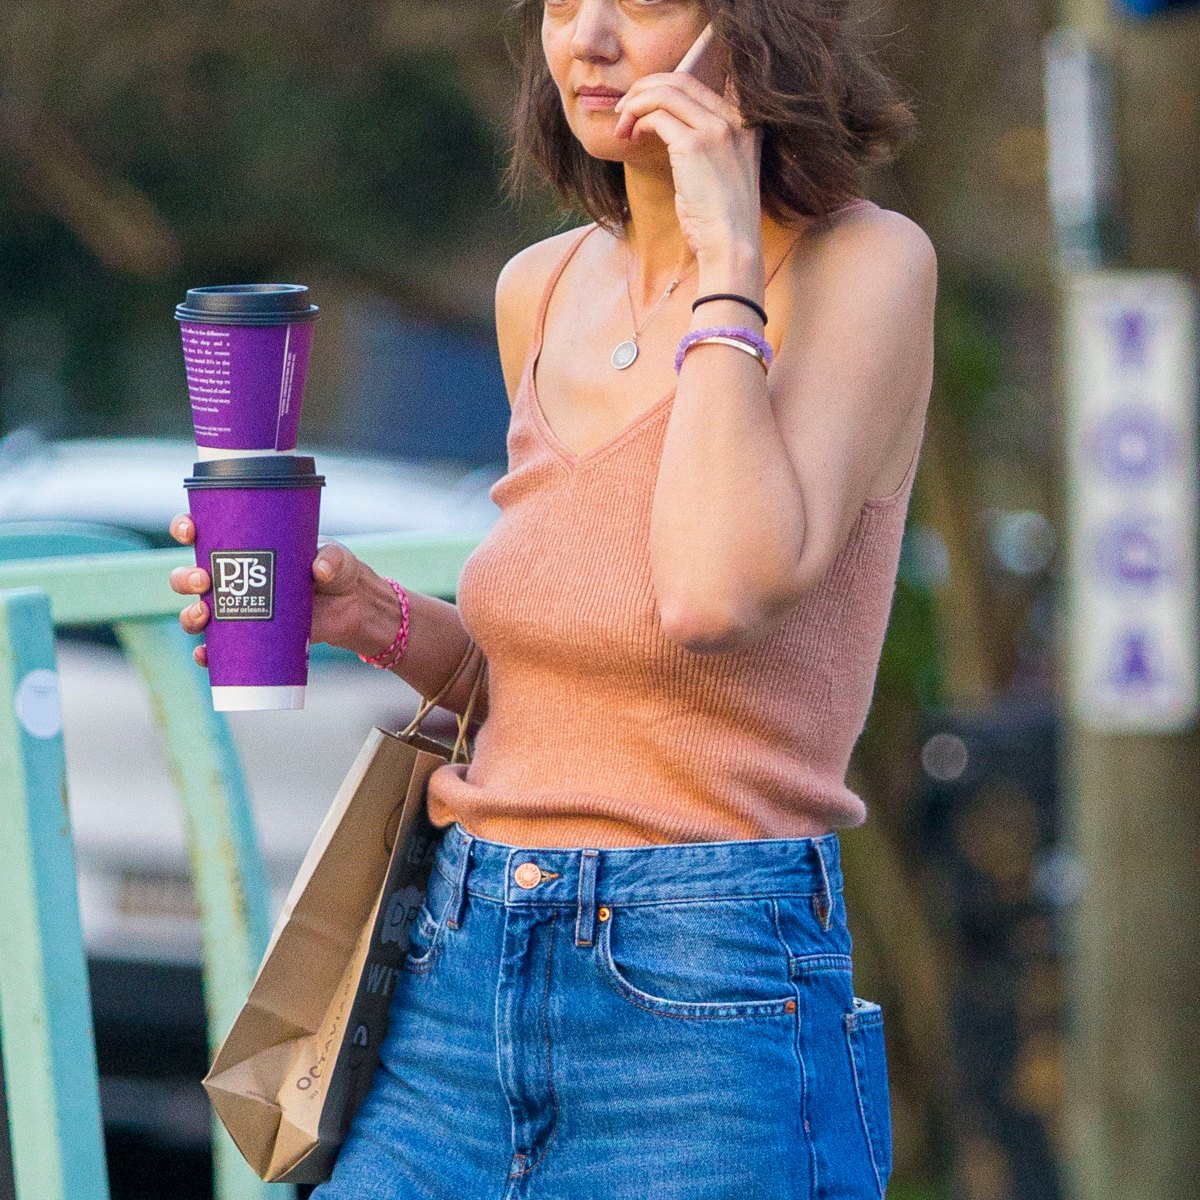 https://www.intouchweekly.com/wp-content/uploads/2022/07/Katie-Holmes-Orange-TankTop-Braless-New-Orleans-December-2018.jpg?resize=1200%2C1200&quality=86&strip=all